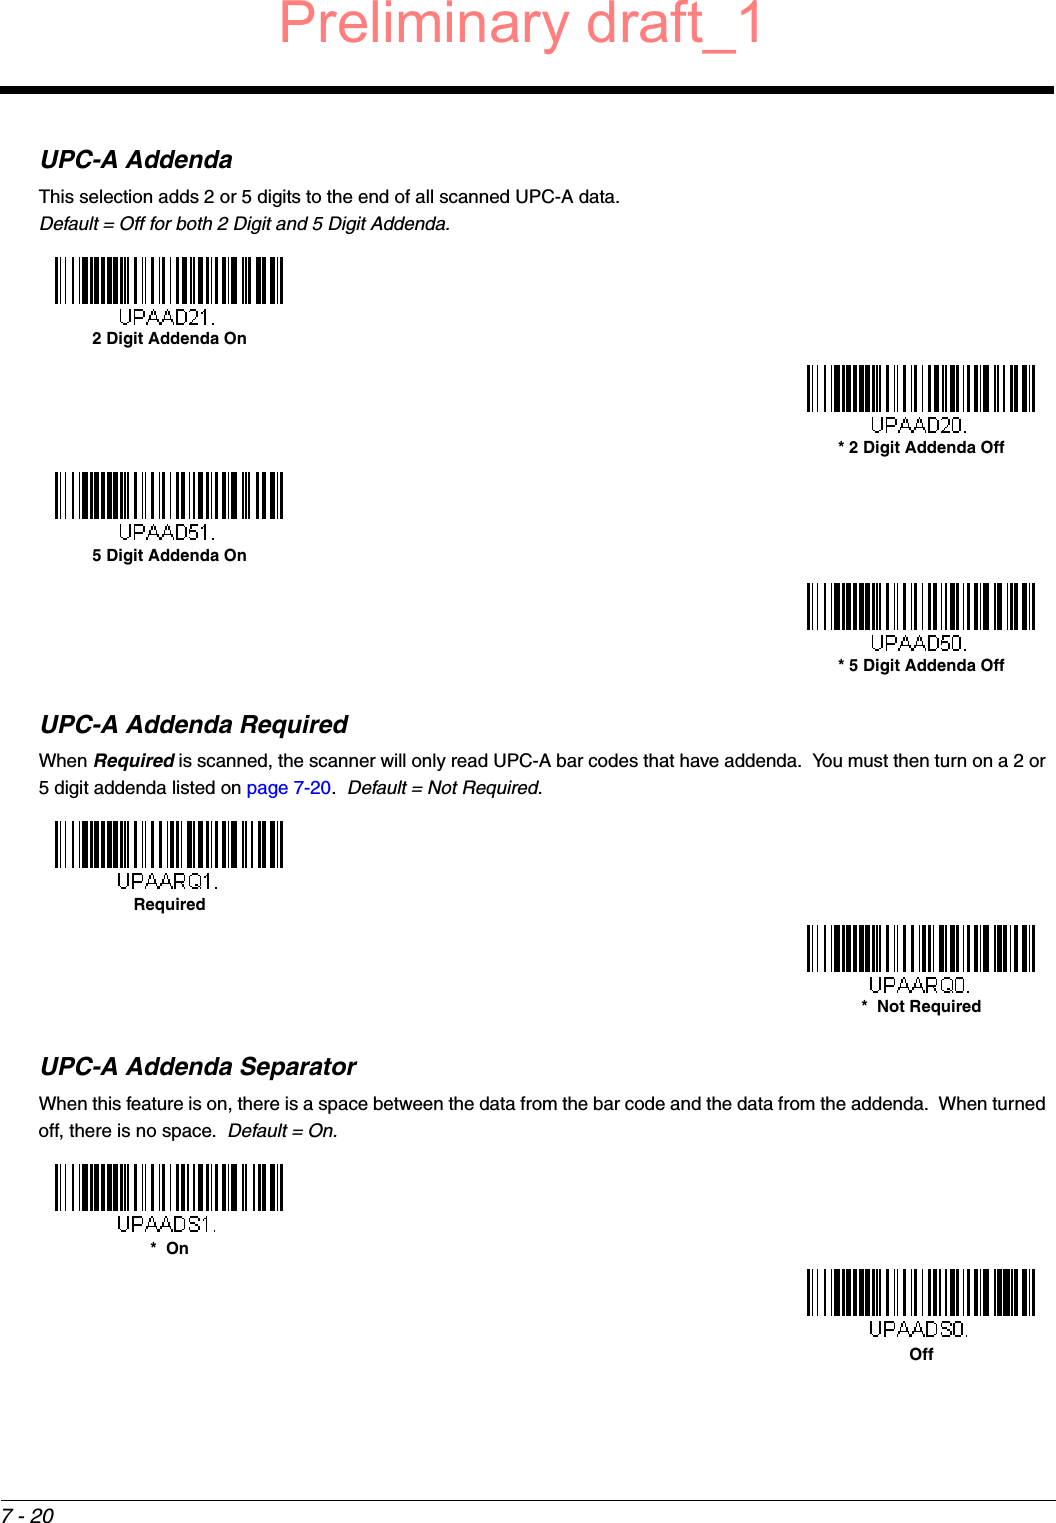 7 - 20UPC-A AddendaThis selection adds 2 or 5 digits to the end of all scanned UPC-A data.Default = Off for both 2 Digit and 5 Digit Addenda.UPC-A Addenda RequiredWhen Required is scanned, the scanner will only read UPC-A bar codes that have addenda.  You must then turn on a 2 or 5 digit addenda listed on page 7-20.  Default = Not Required.UPC-A Addenda SeparatorWhen this feature is on, there is a space between the data from the bar code and the data from the addenda.  When turned off, there is no space.  Default = On.2 Digit Addenda On* 2 Digit Addenda Off5 Digit Addenda On* 5 Digit Addenda OffRequired*  Not Required*  OnOffPreliminary draft_1